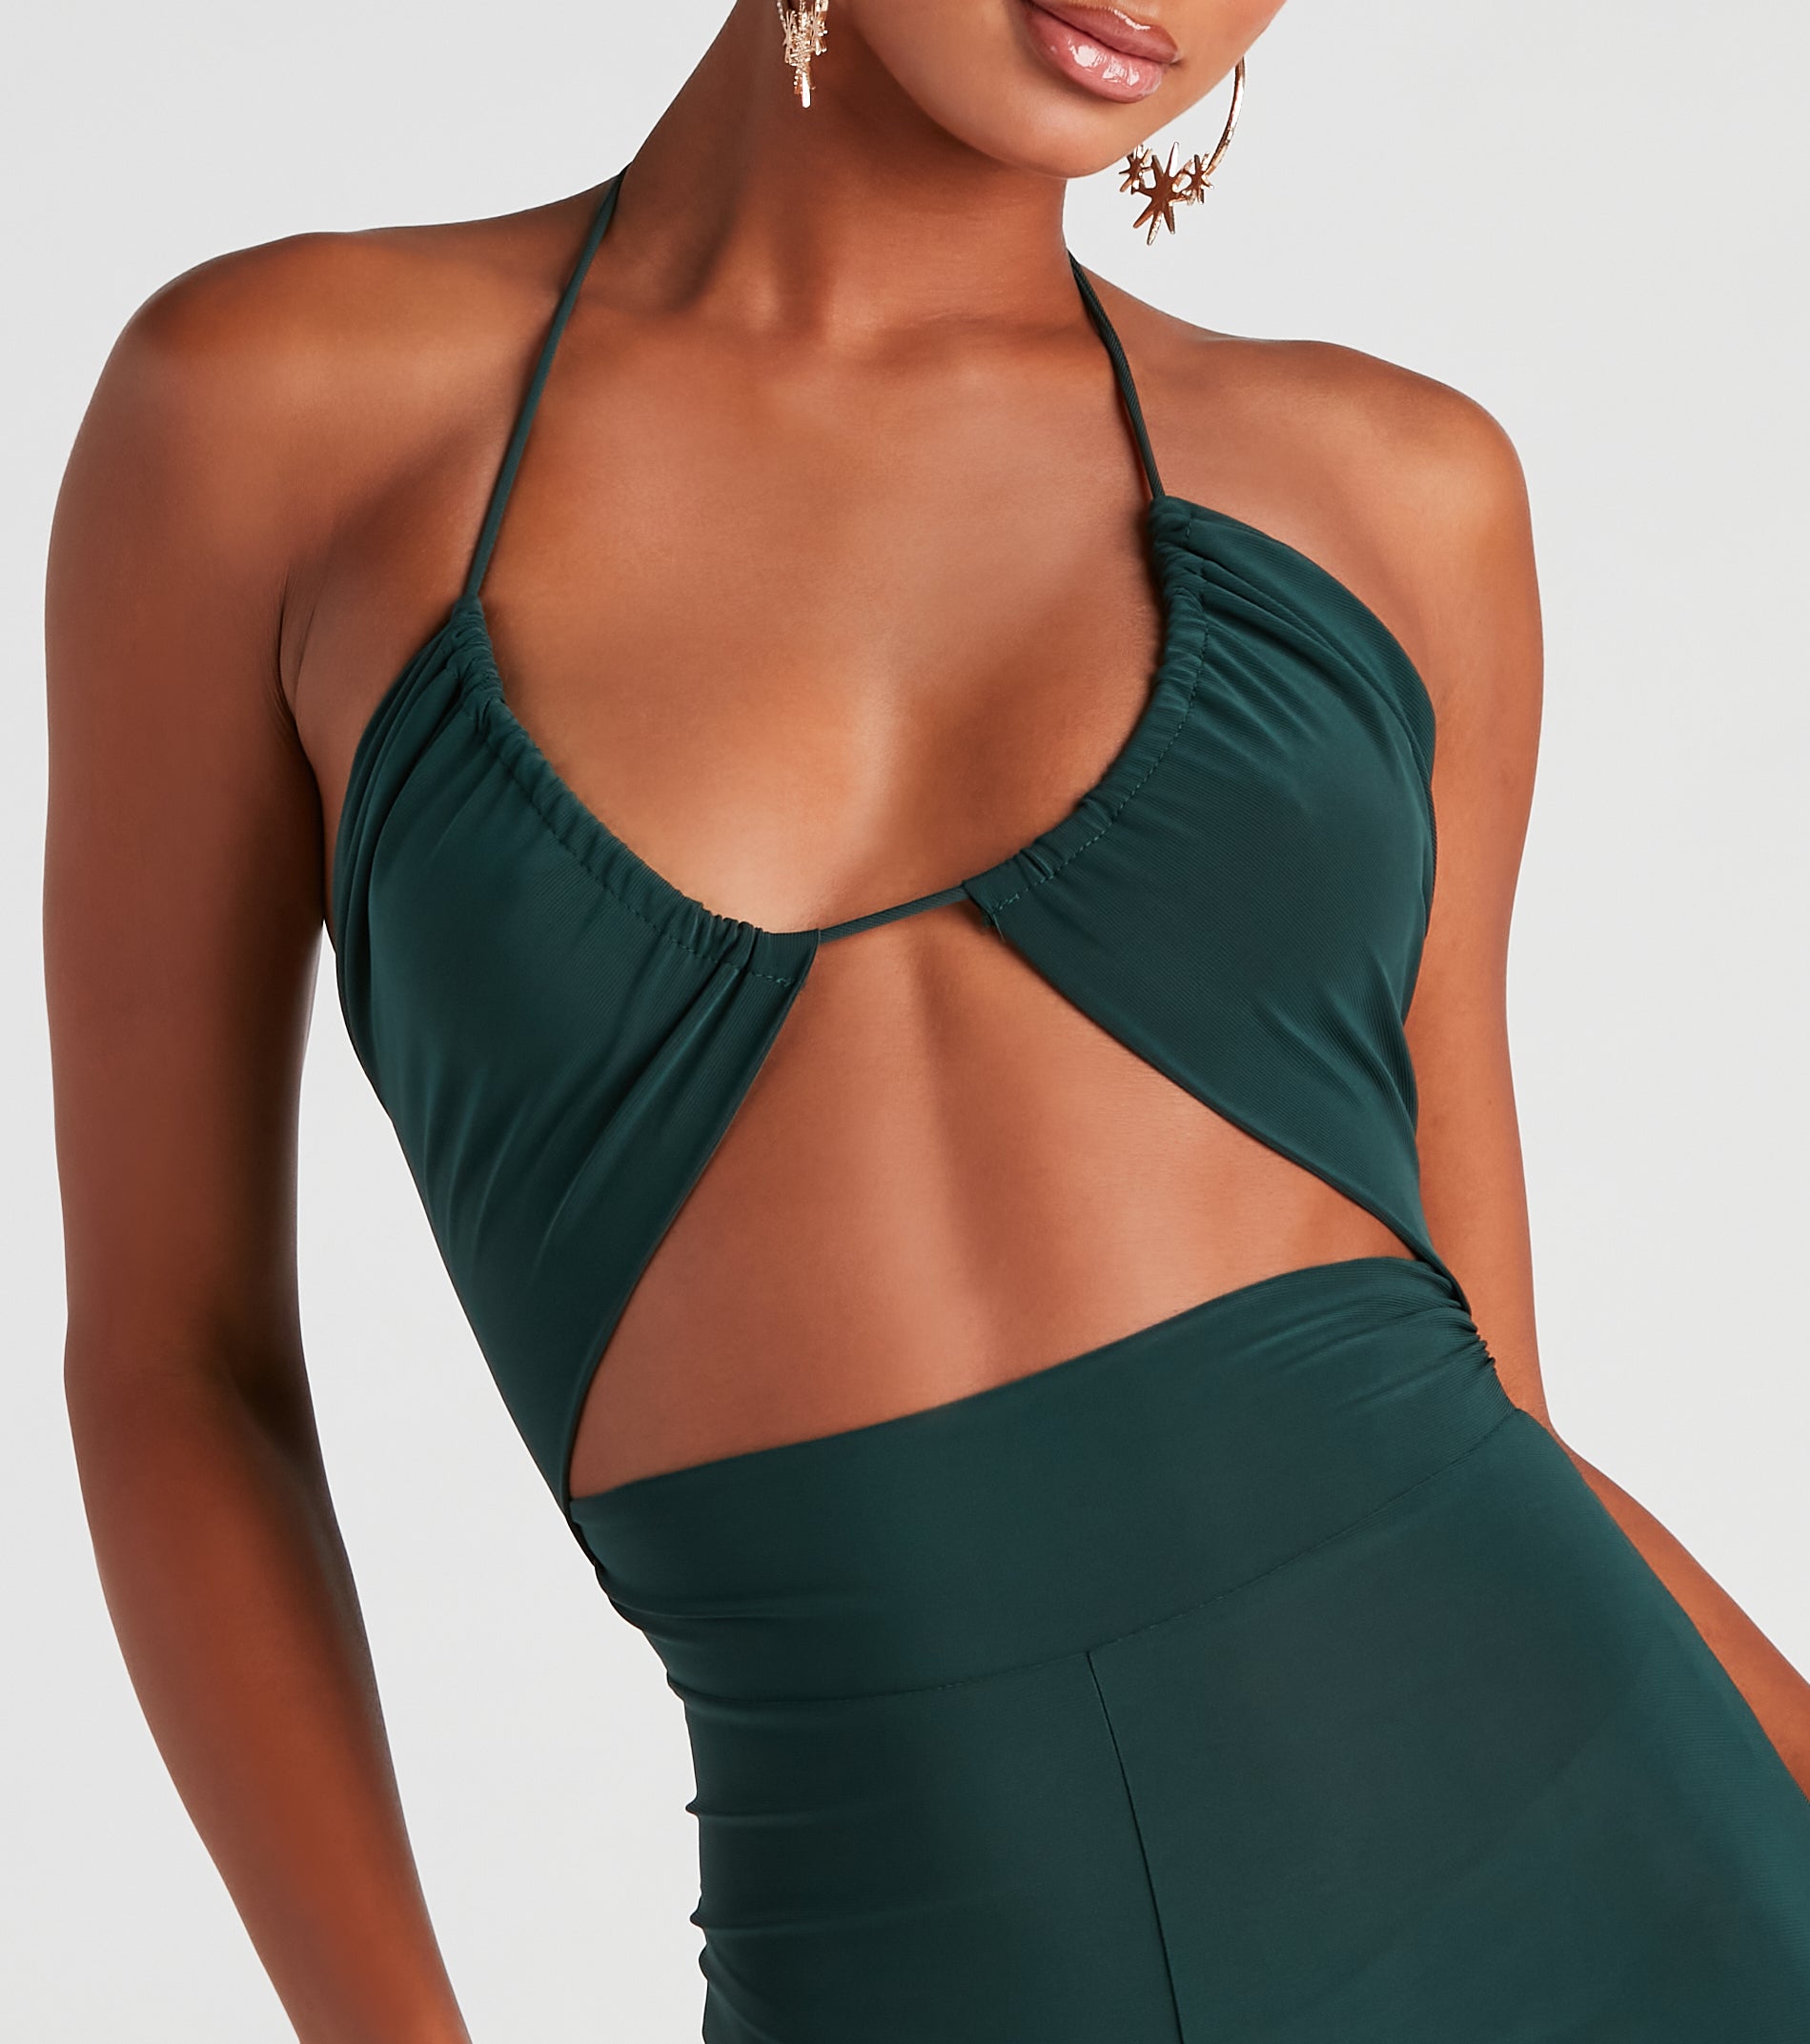 Sleek And Sultry Halter Jumpsuit